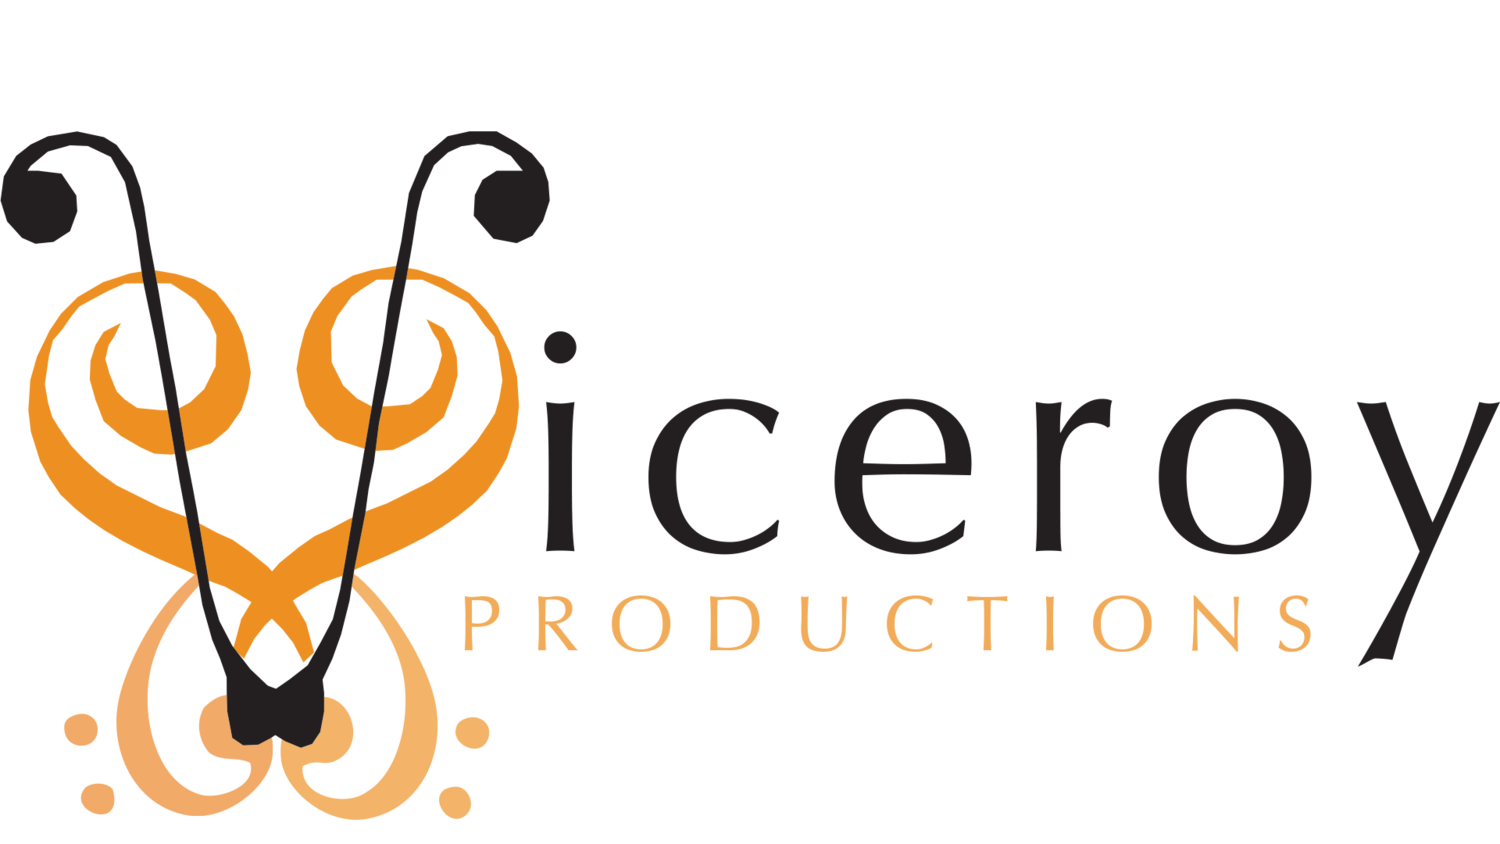 Viceroy Productions